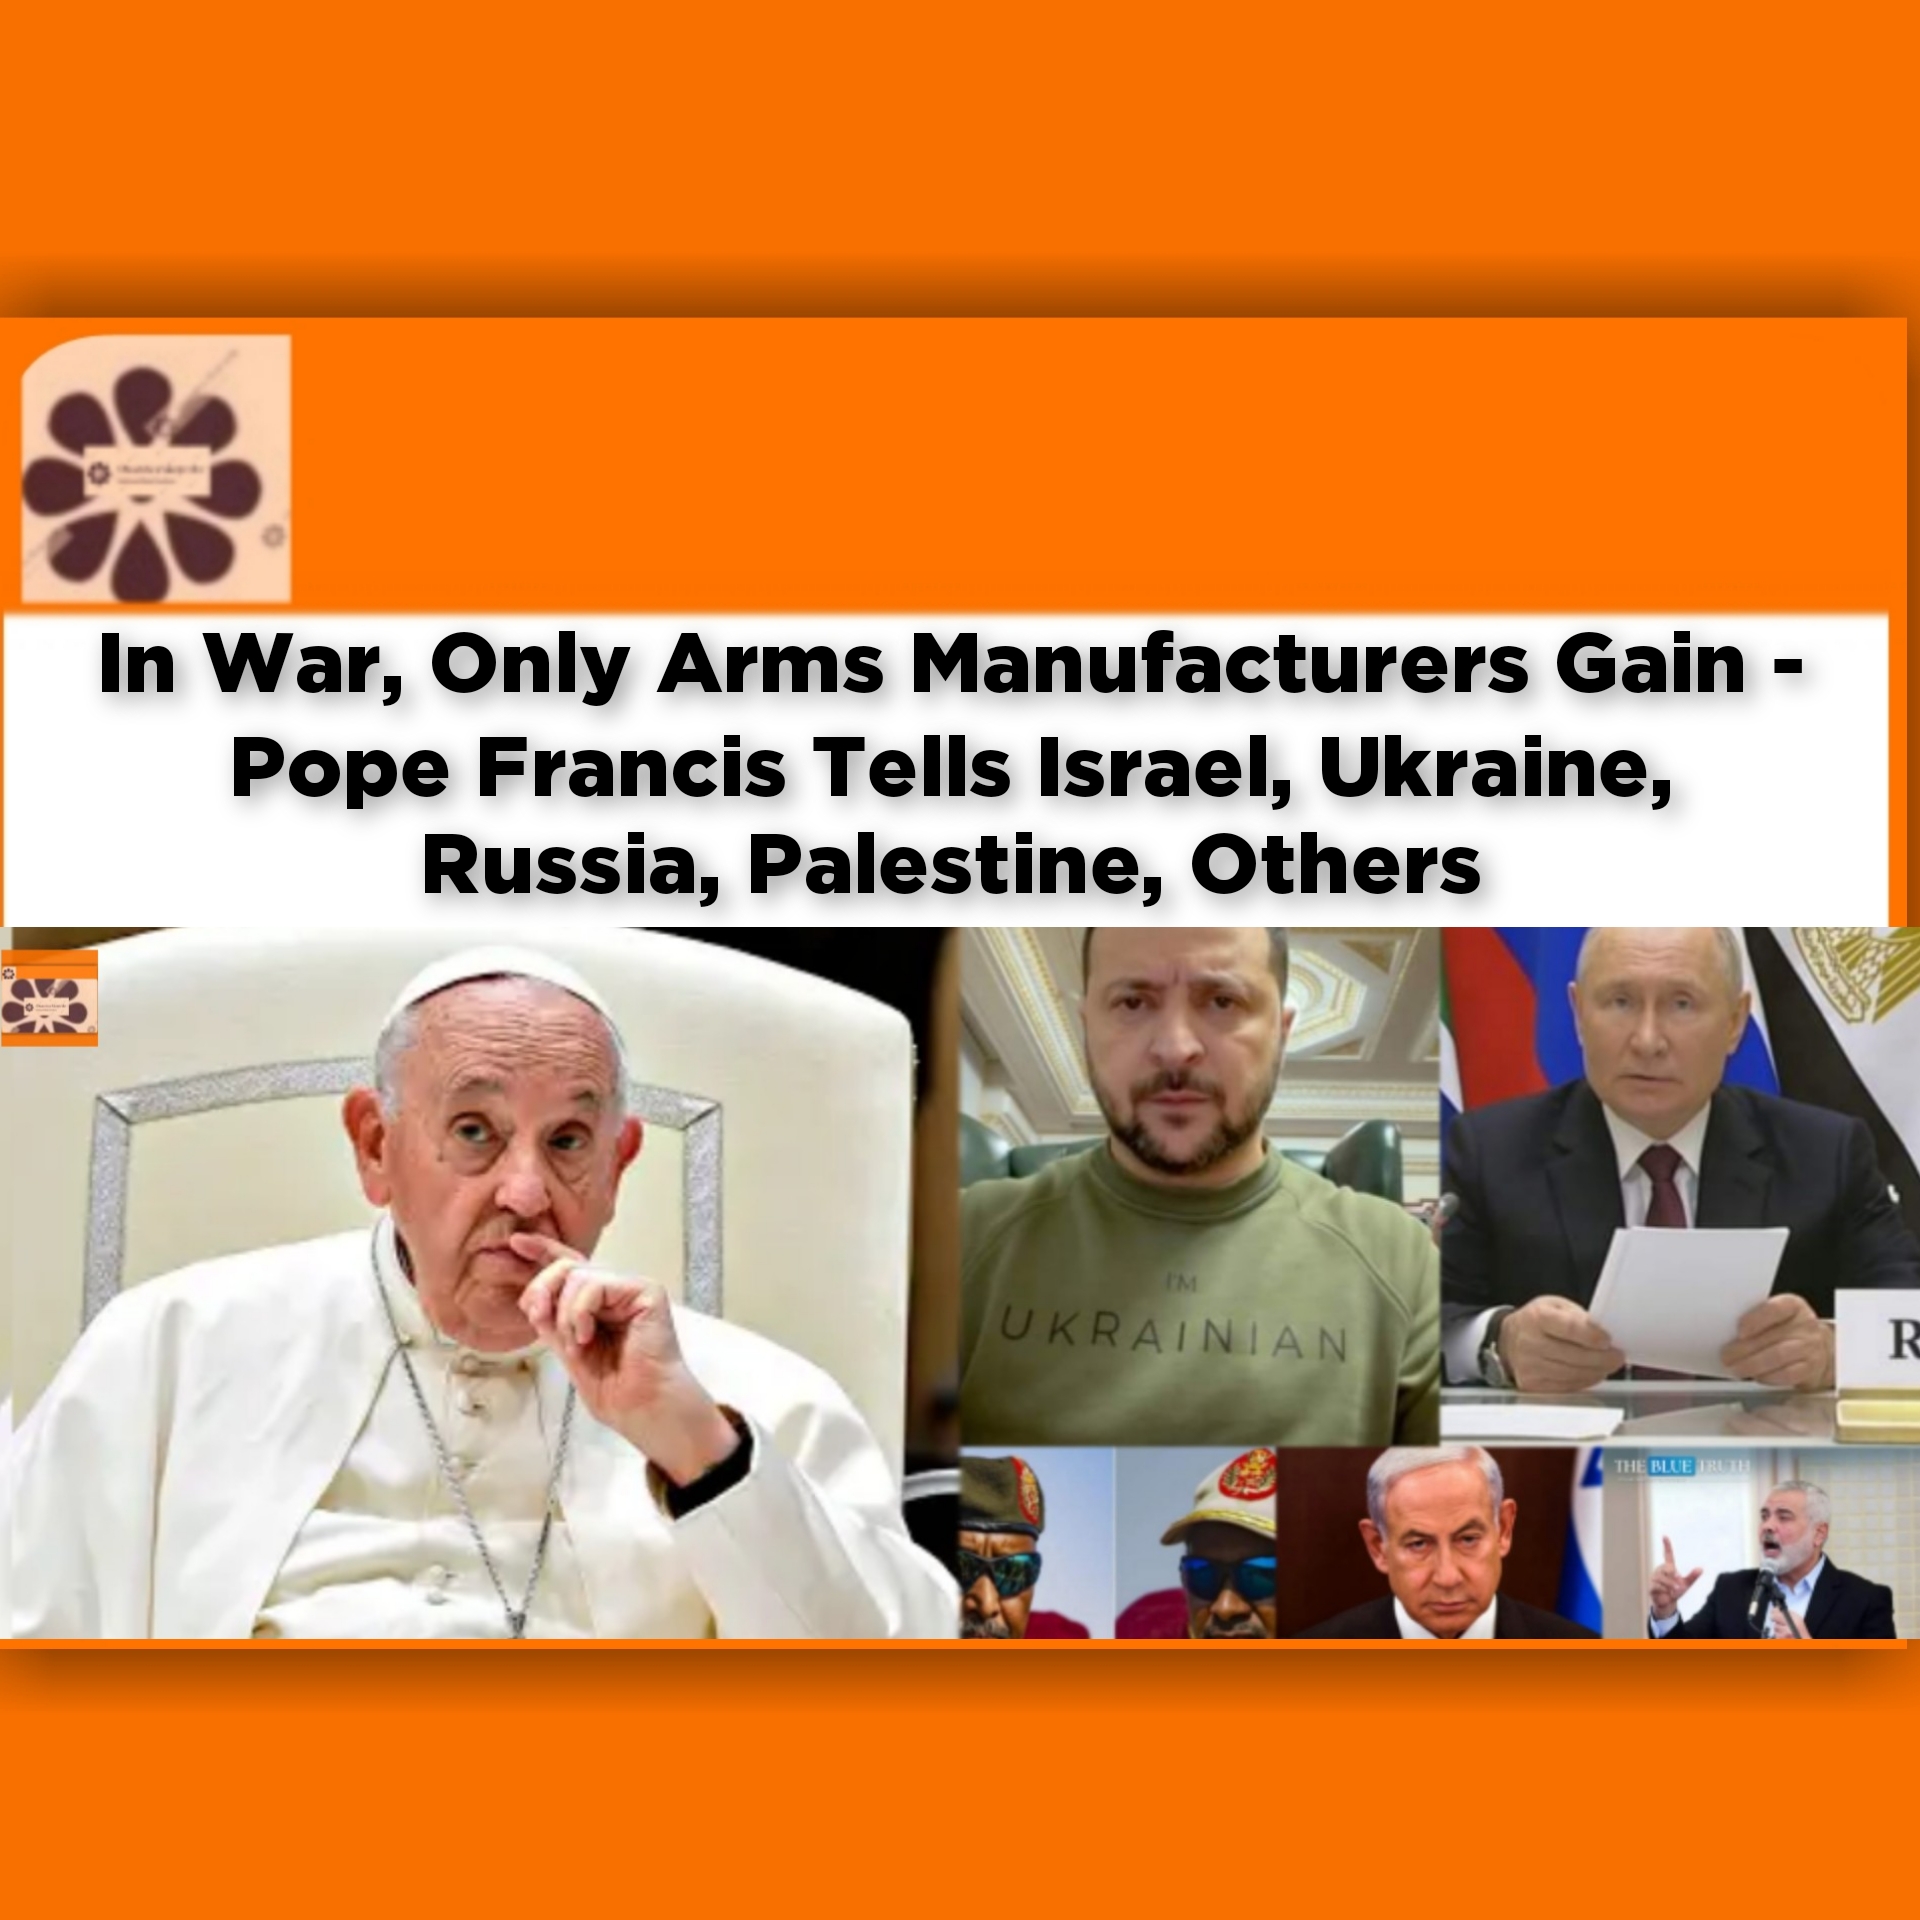 In War, Only Arms Manufacturers Gain - Pope Francis Tells Israel, Ukraine, Russia, Palestine, Others ~ OsazuwaAkonedo #Oil